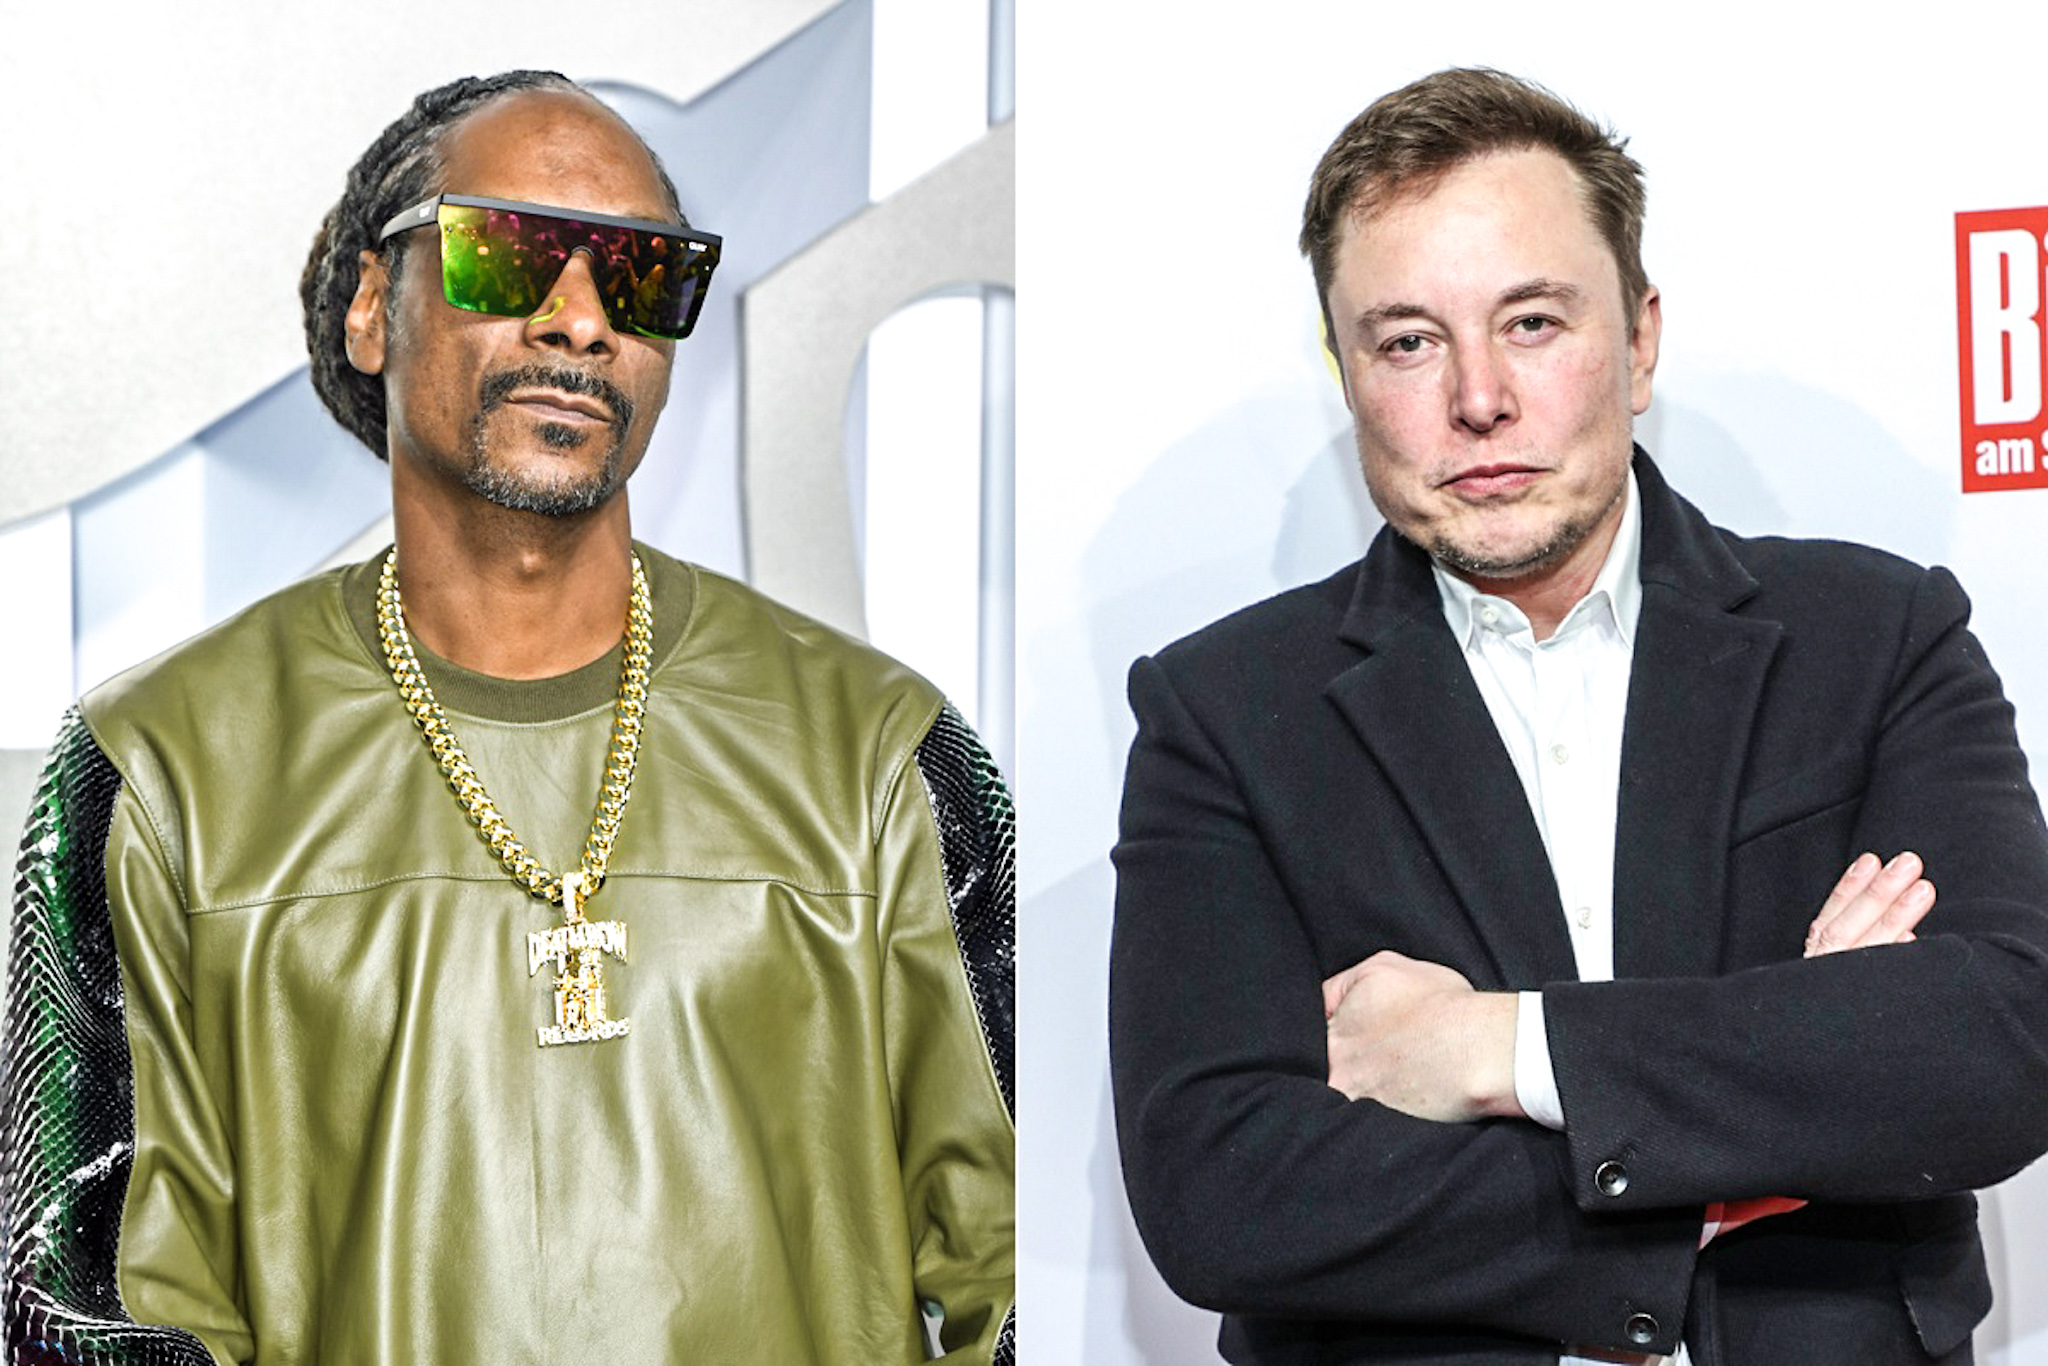 Snoop Dogg Voted To Run Twitter After Elon Musk Told To Step Down